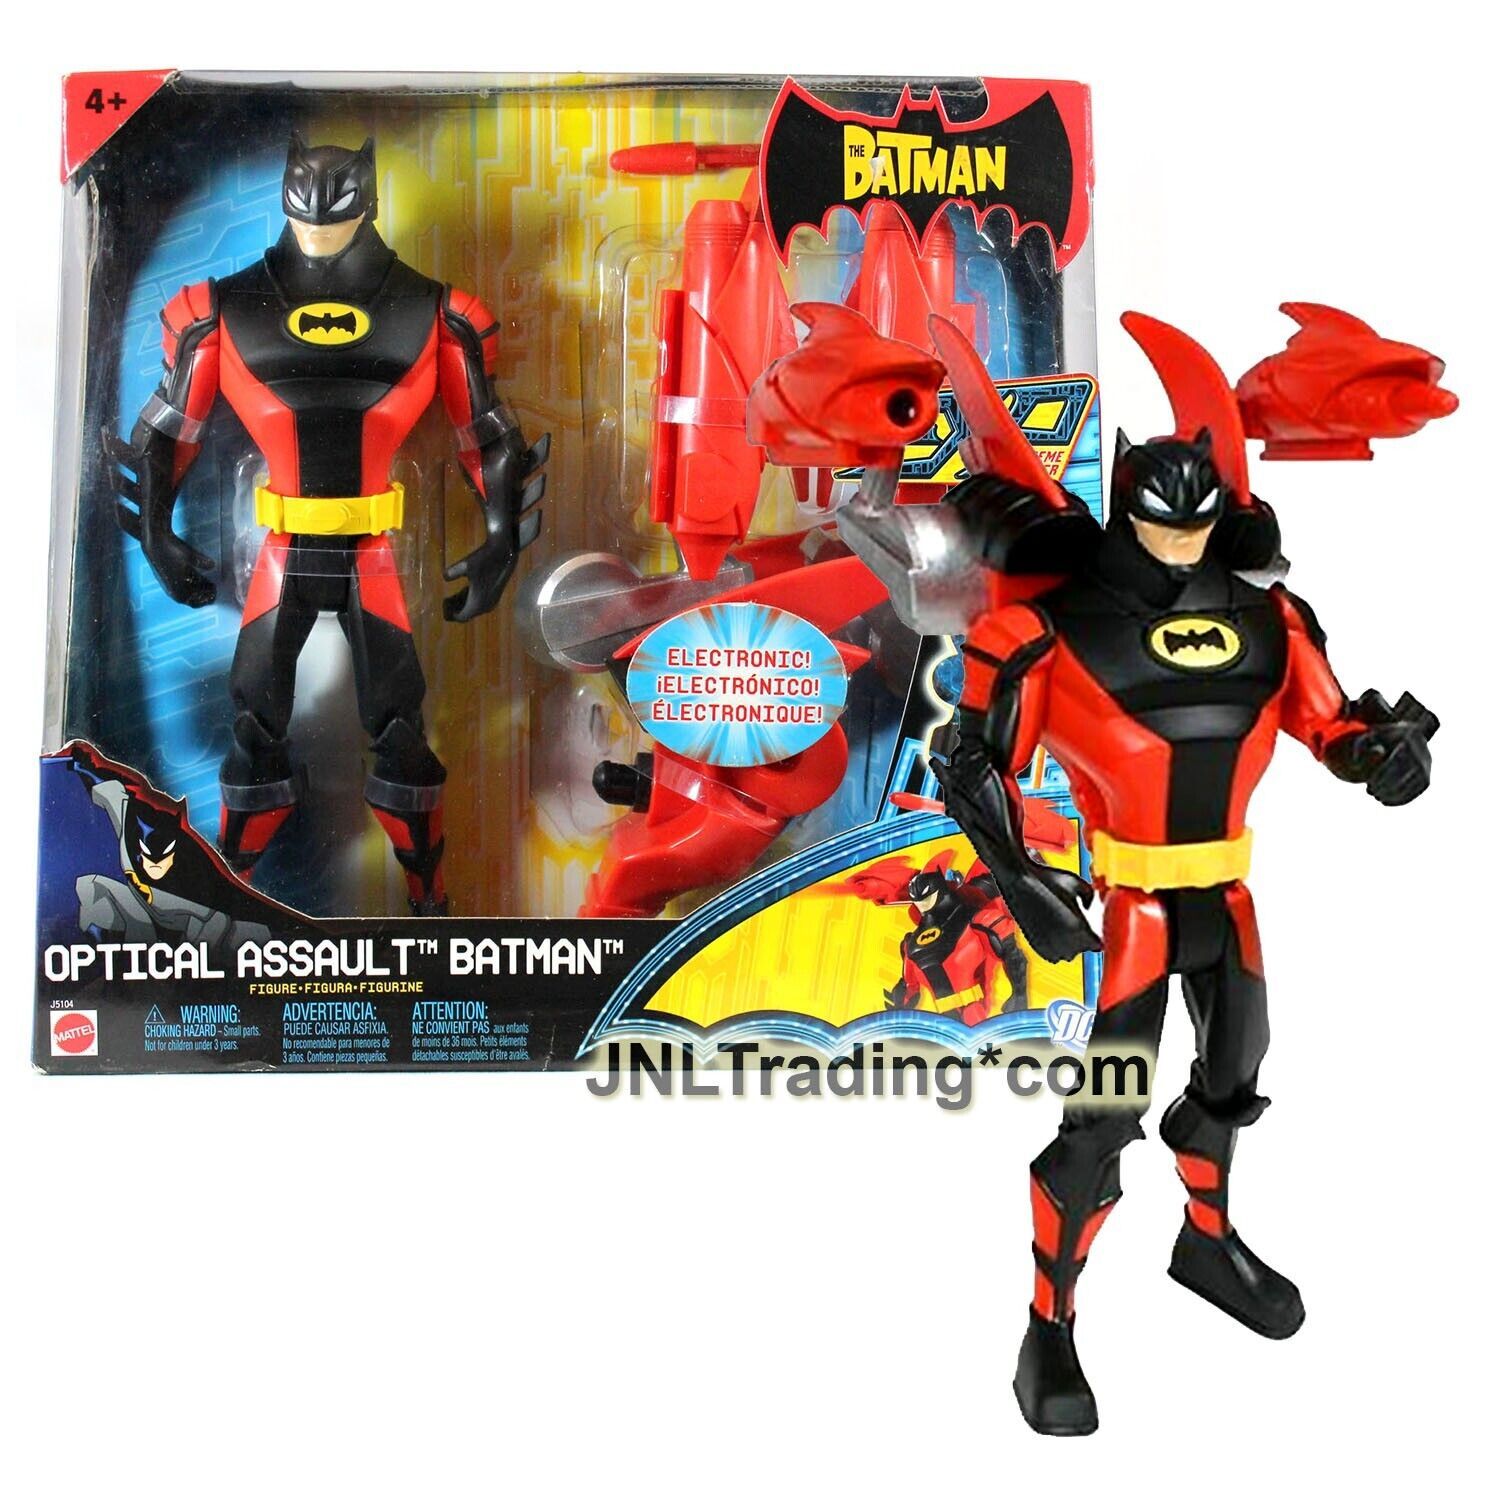 Primary image for Year 2006 DC Comics EXP Extreme Power 8 Inch Figure - OPTICAL ASSAULT BATMAN